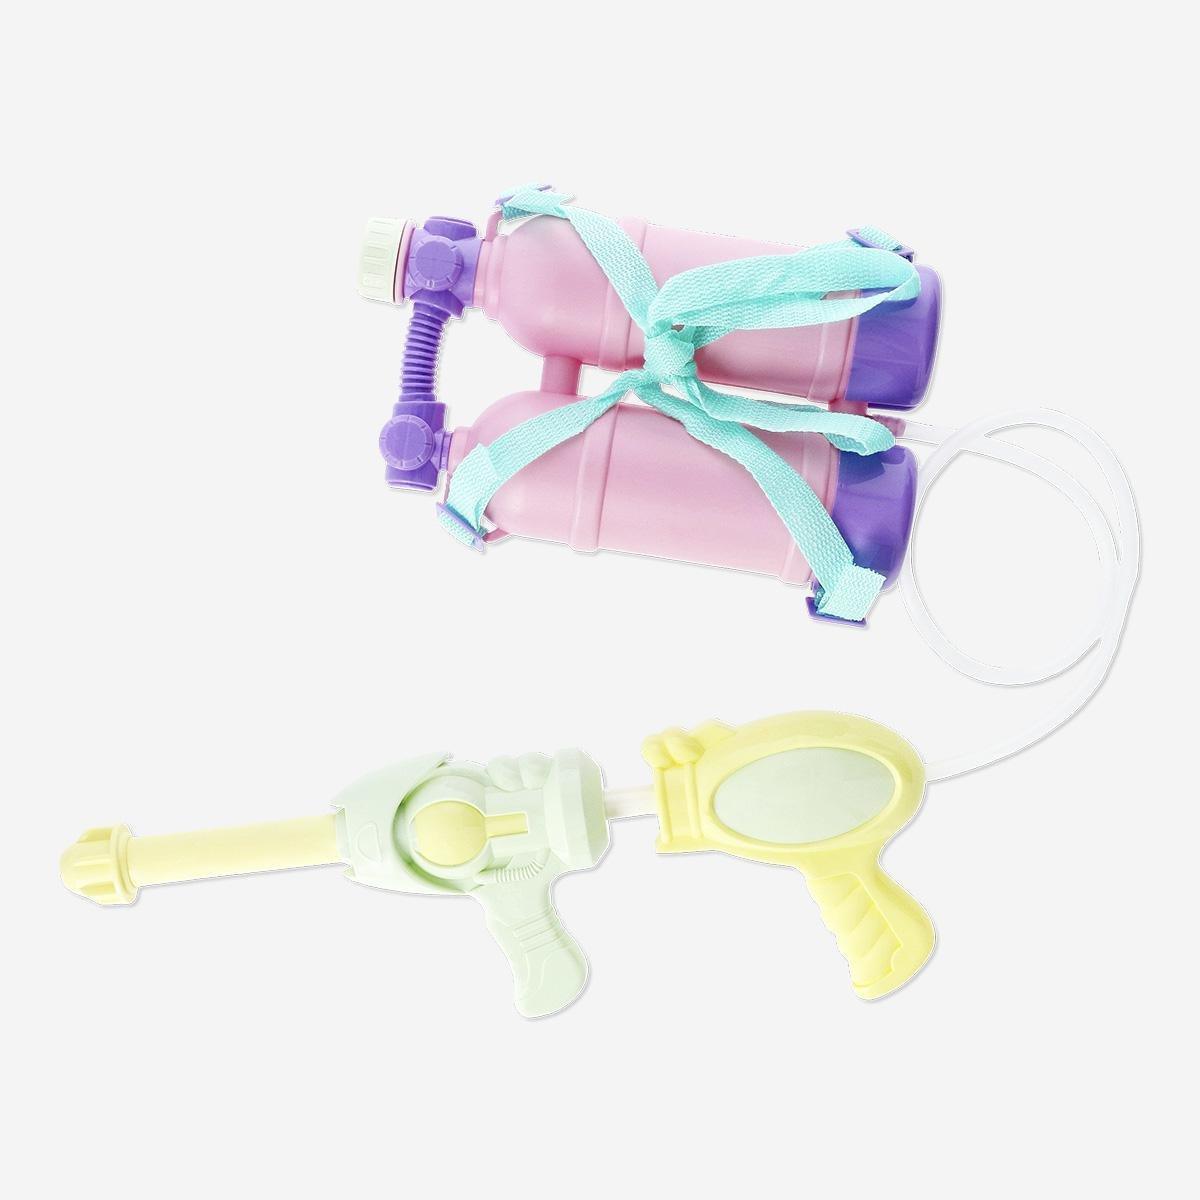 Multicolour toy water pump